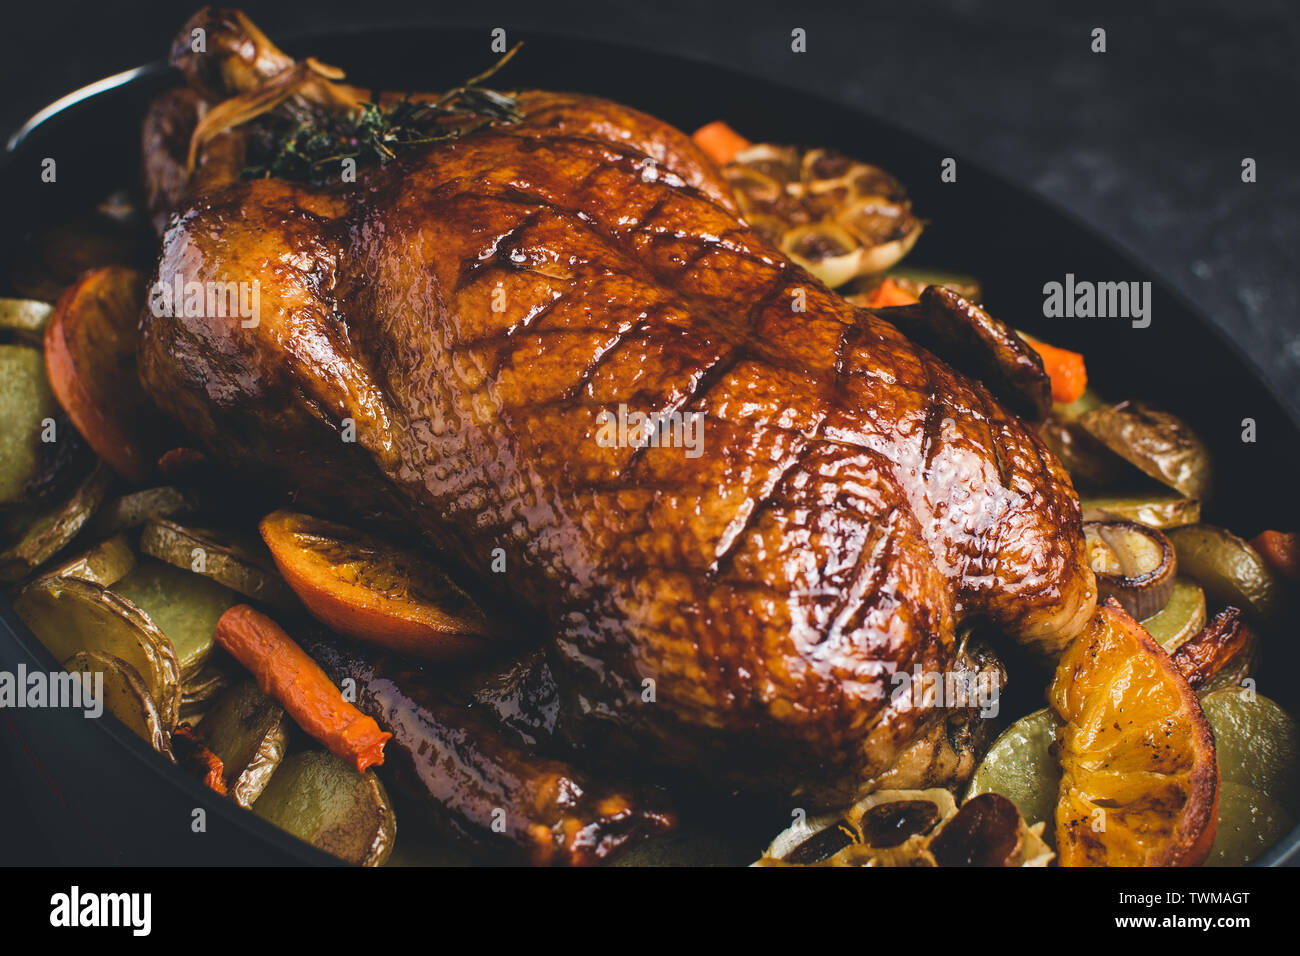 Roasted Whole Goose with Carrots, Oranges and Potatoes on Dark Stone Background Stock Photo